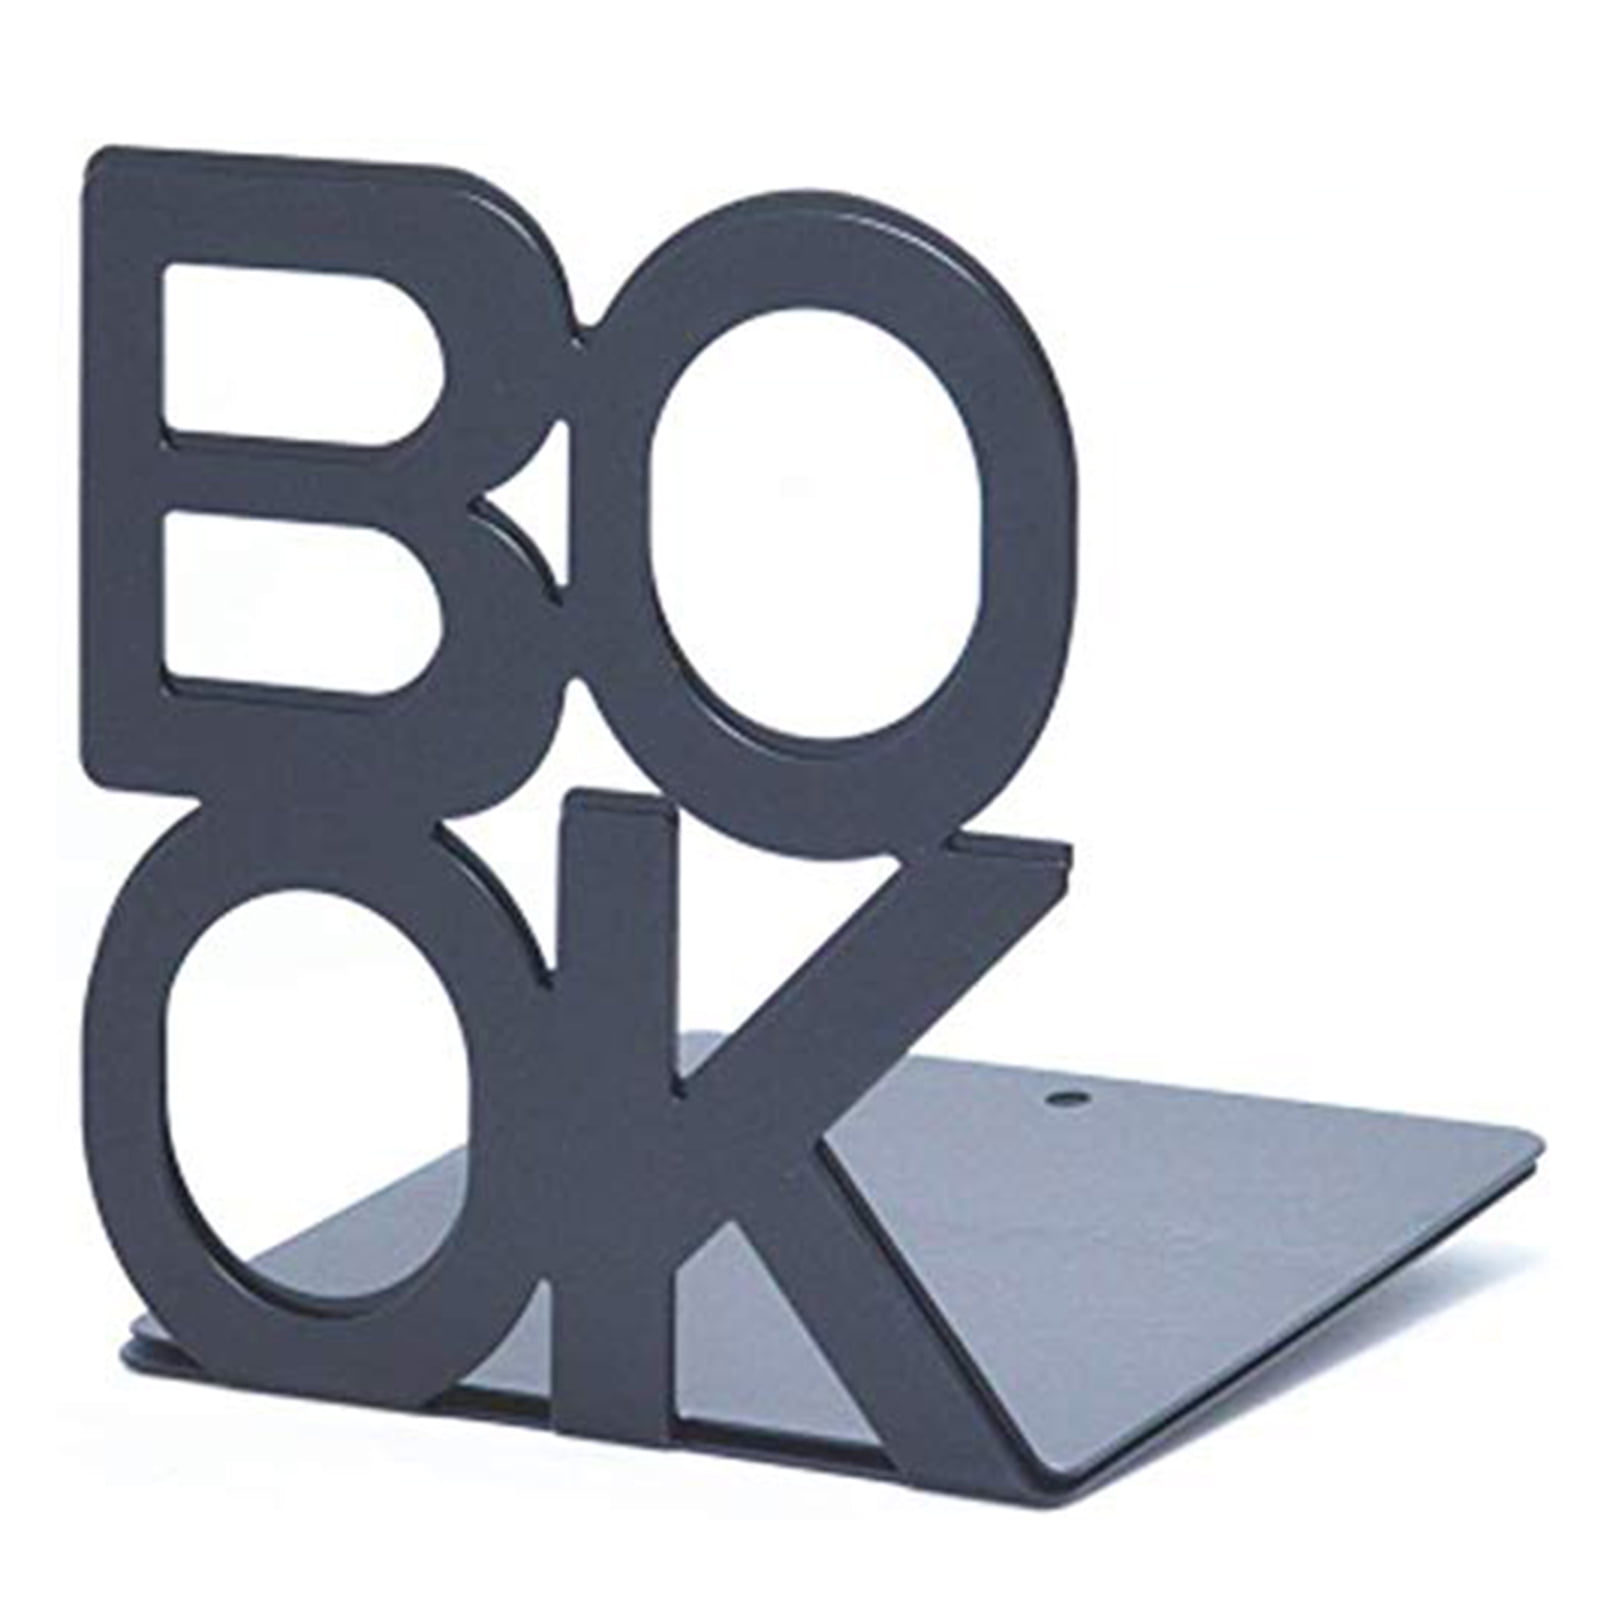 Alphabet Shaped Metal Bookends Bookend Stand Reading Book Stand Document Holder 